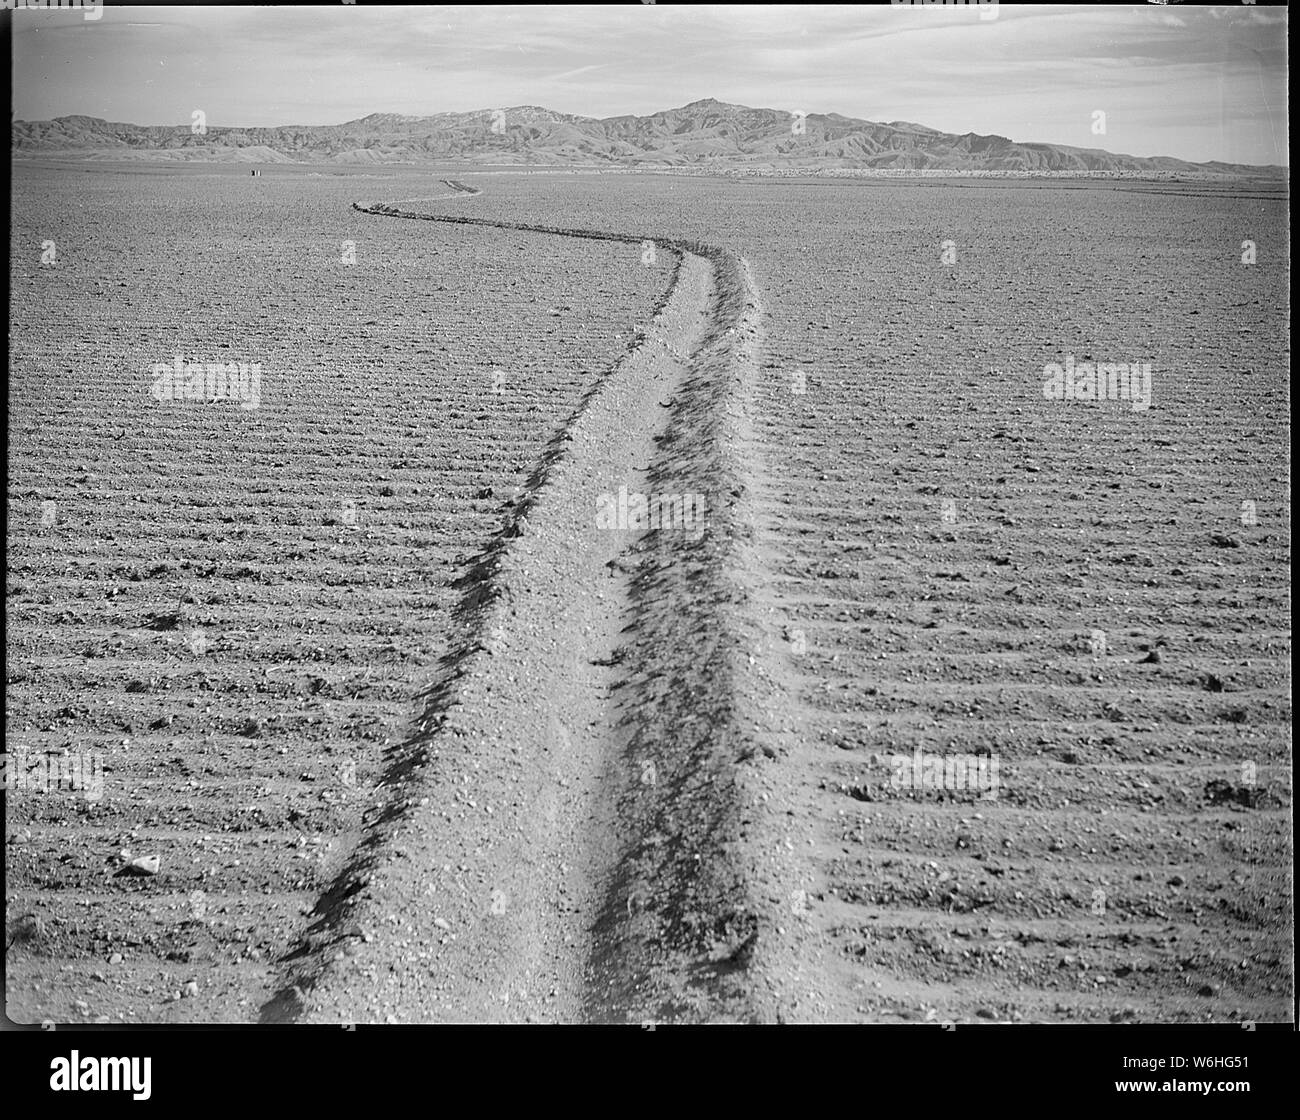 Heart Mountain Relocation Center, Heart Mountain, Wyoming. Land cleared and planted to grain crops. . . .; Scope and content:  The full caption for this photograph reads: Heart Mountain Relocation Center, Heart Mountain, Wyoming. Land cleared and planted to grain crops. This pictrue shows the contoured irrigation system which is practiced by the Heart Mountain Agriculture Section. This method of irrigation prevents soil erosion. Stock Photo